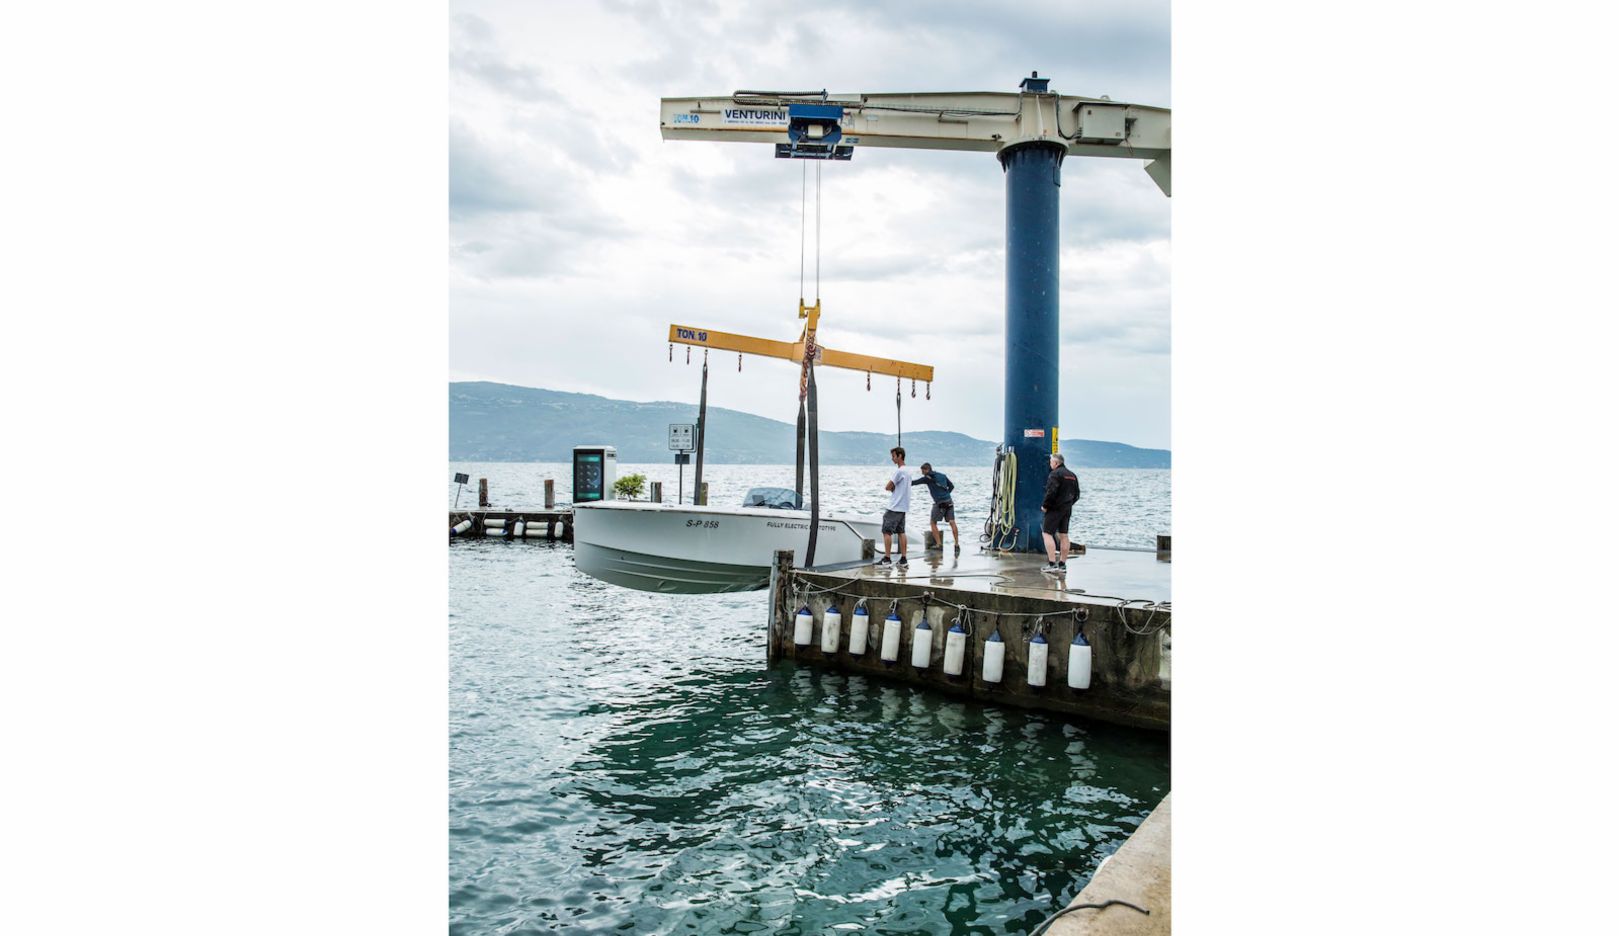 A successful test: After its spin on Lake Garda, the prototype is lifted out of the water again. 